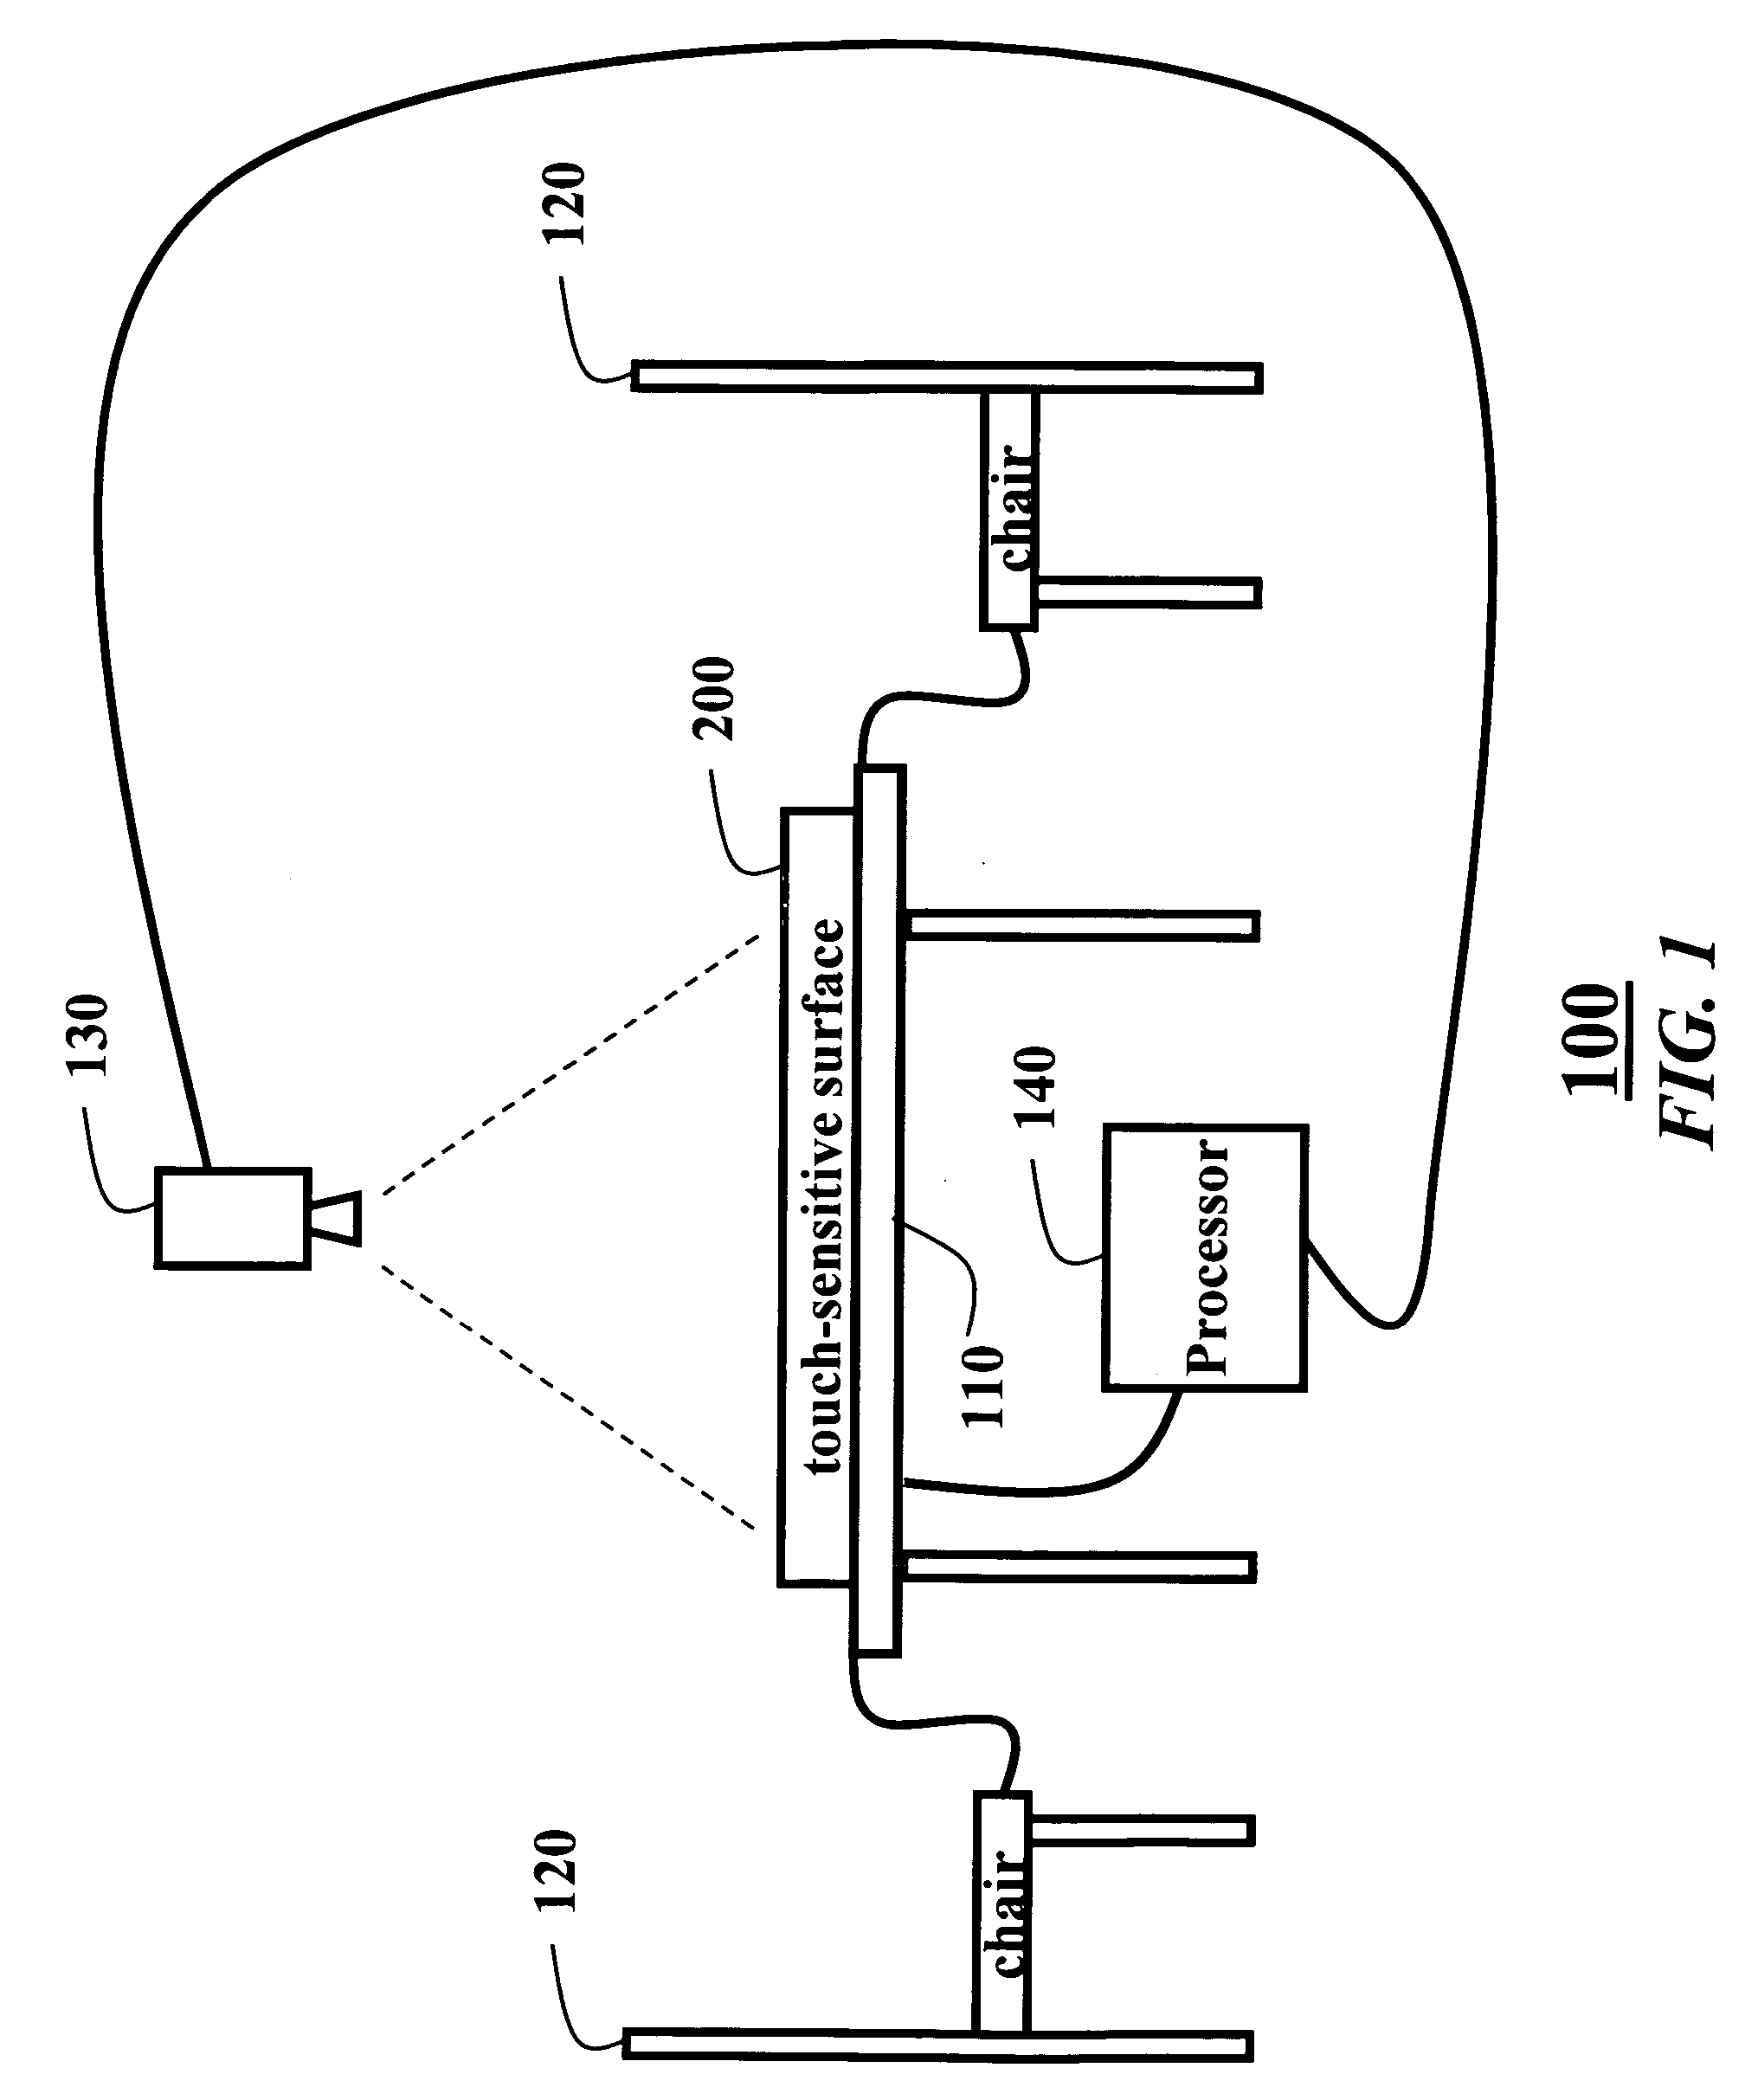 Method and system for emulating a mouse on a multi-touch sensitive surface